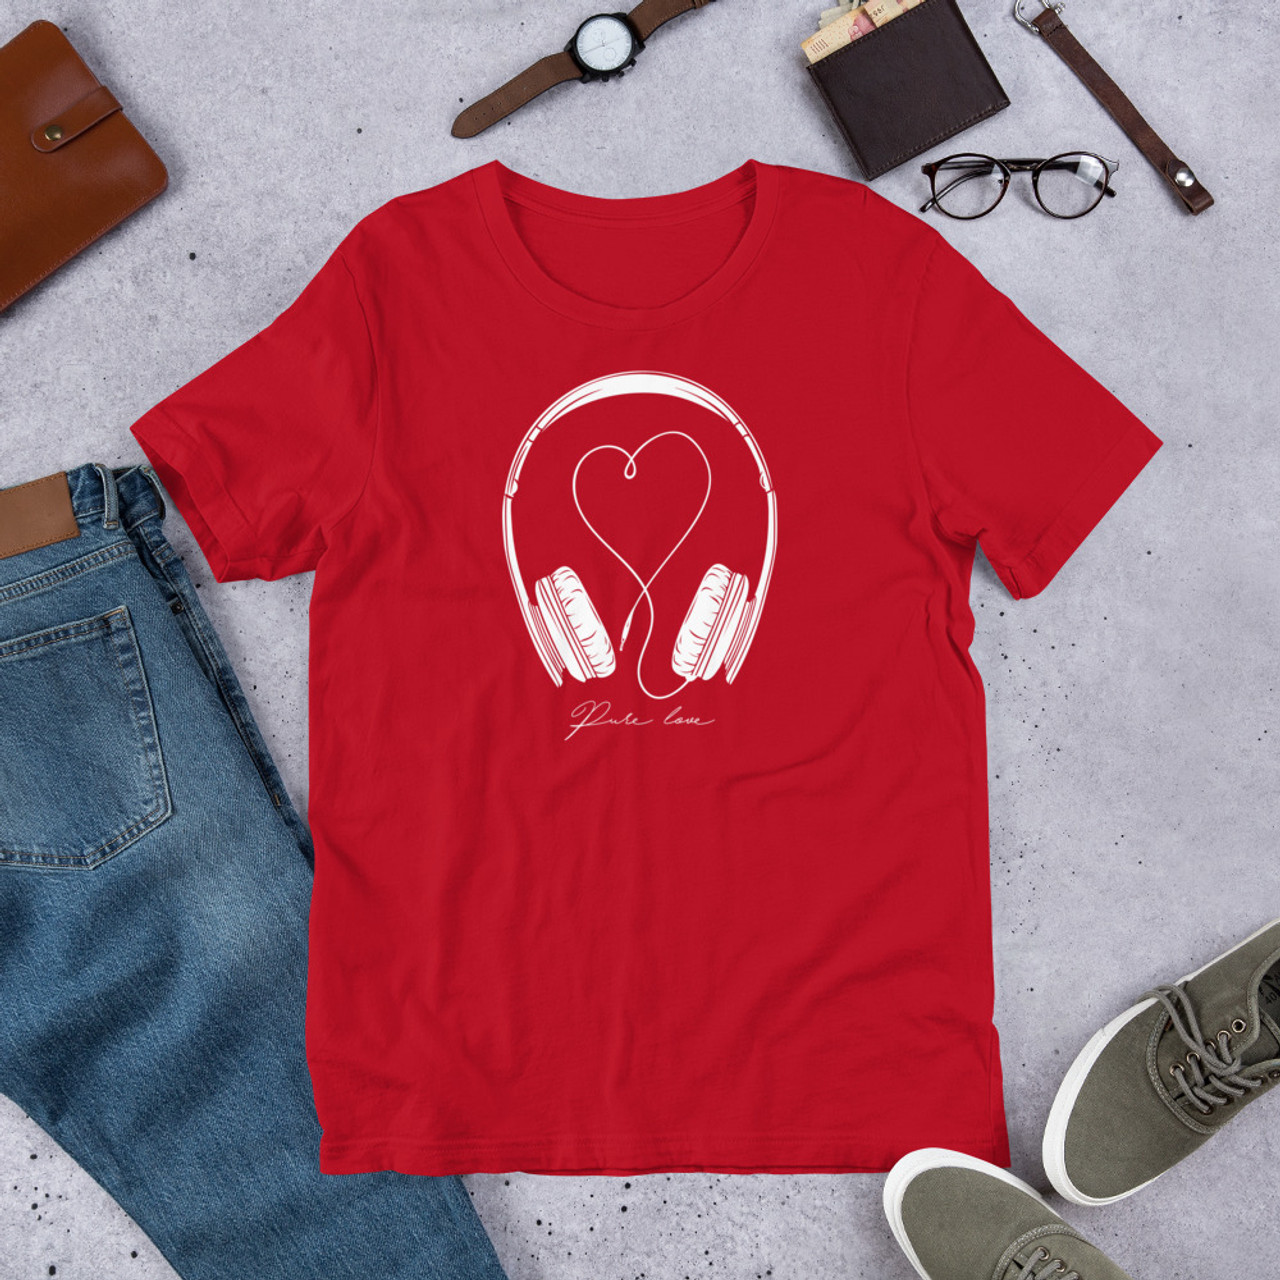 Red T-Shirt - Bella + Canvas 3001 Pure Love